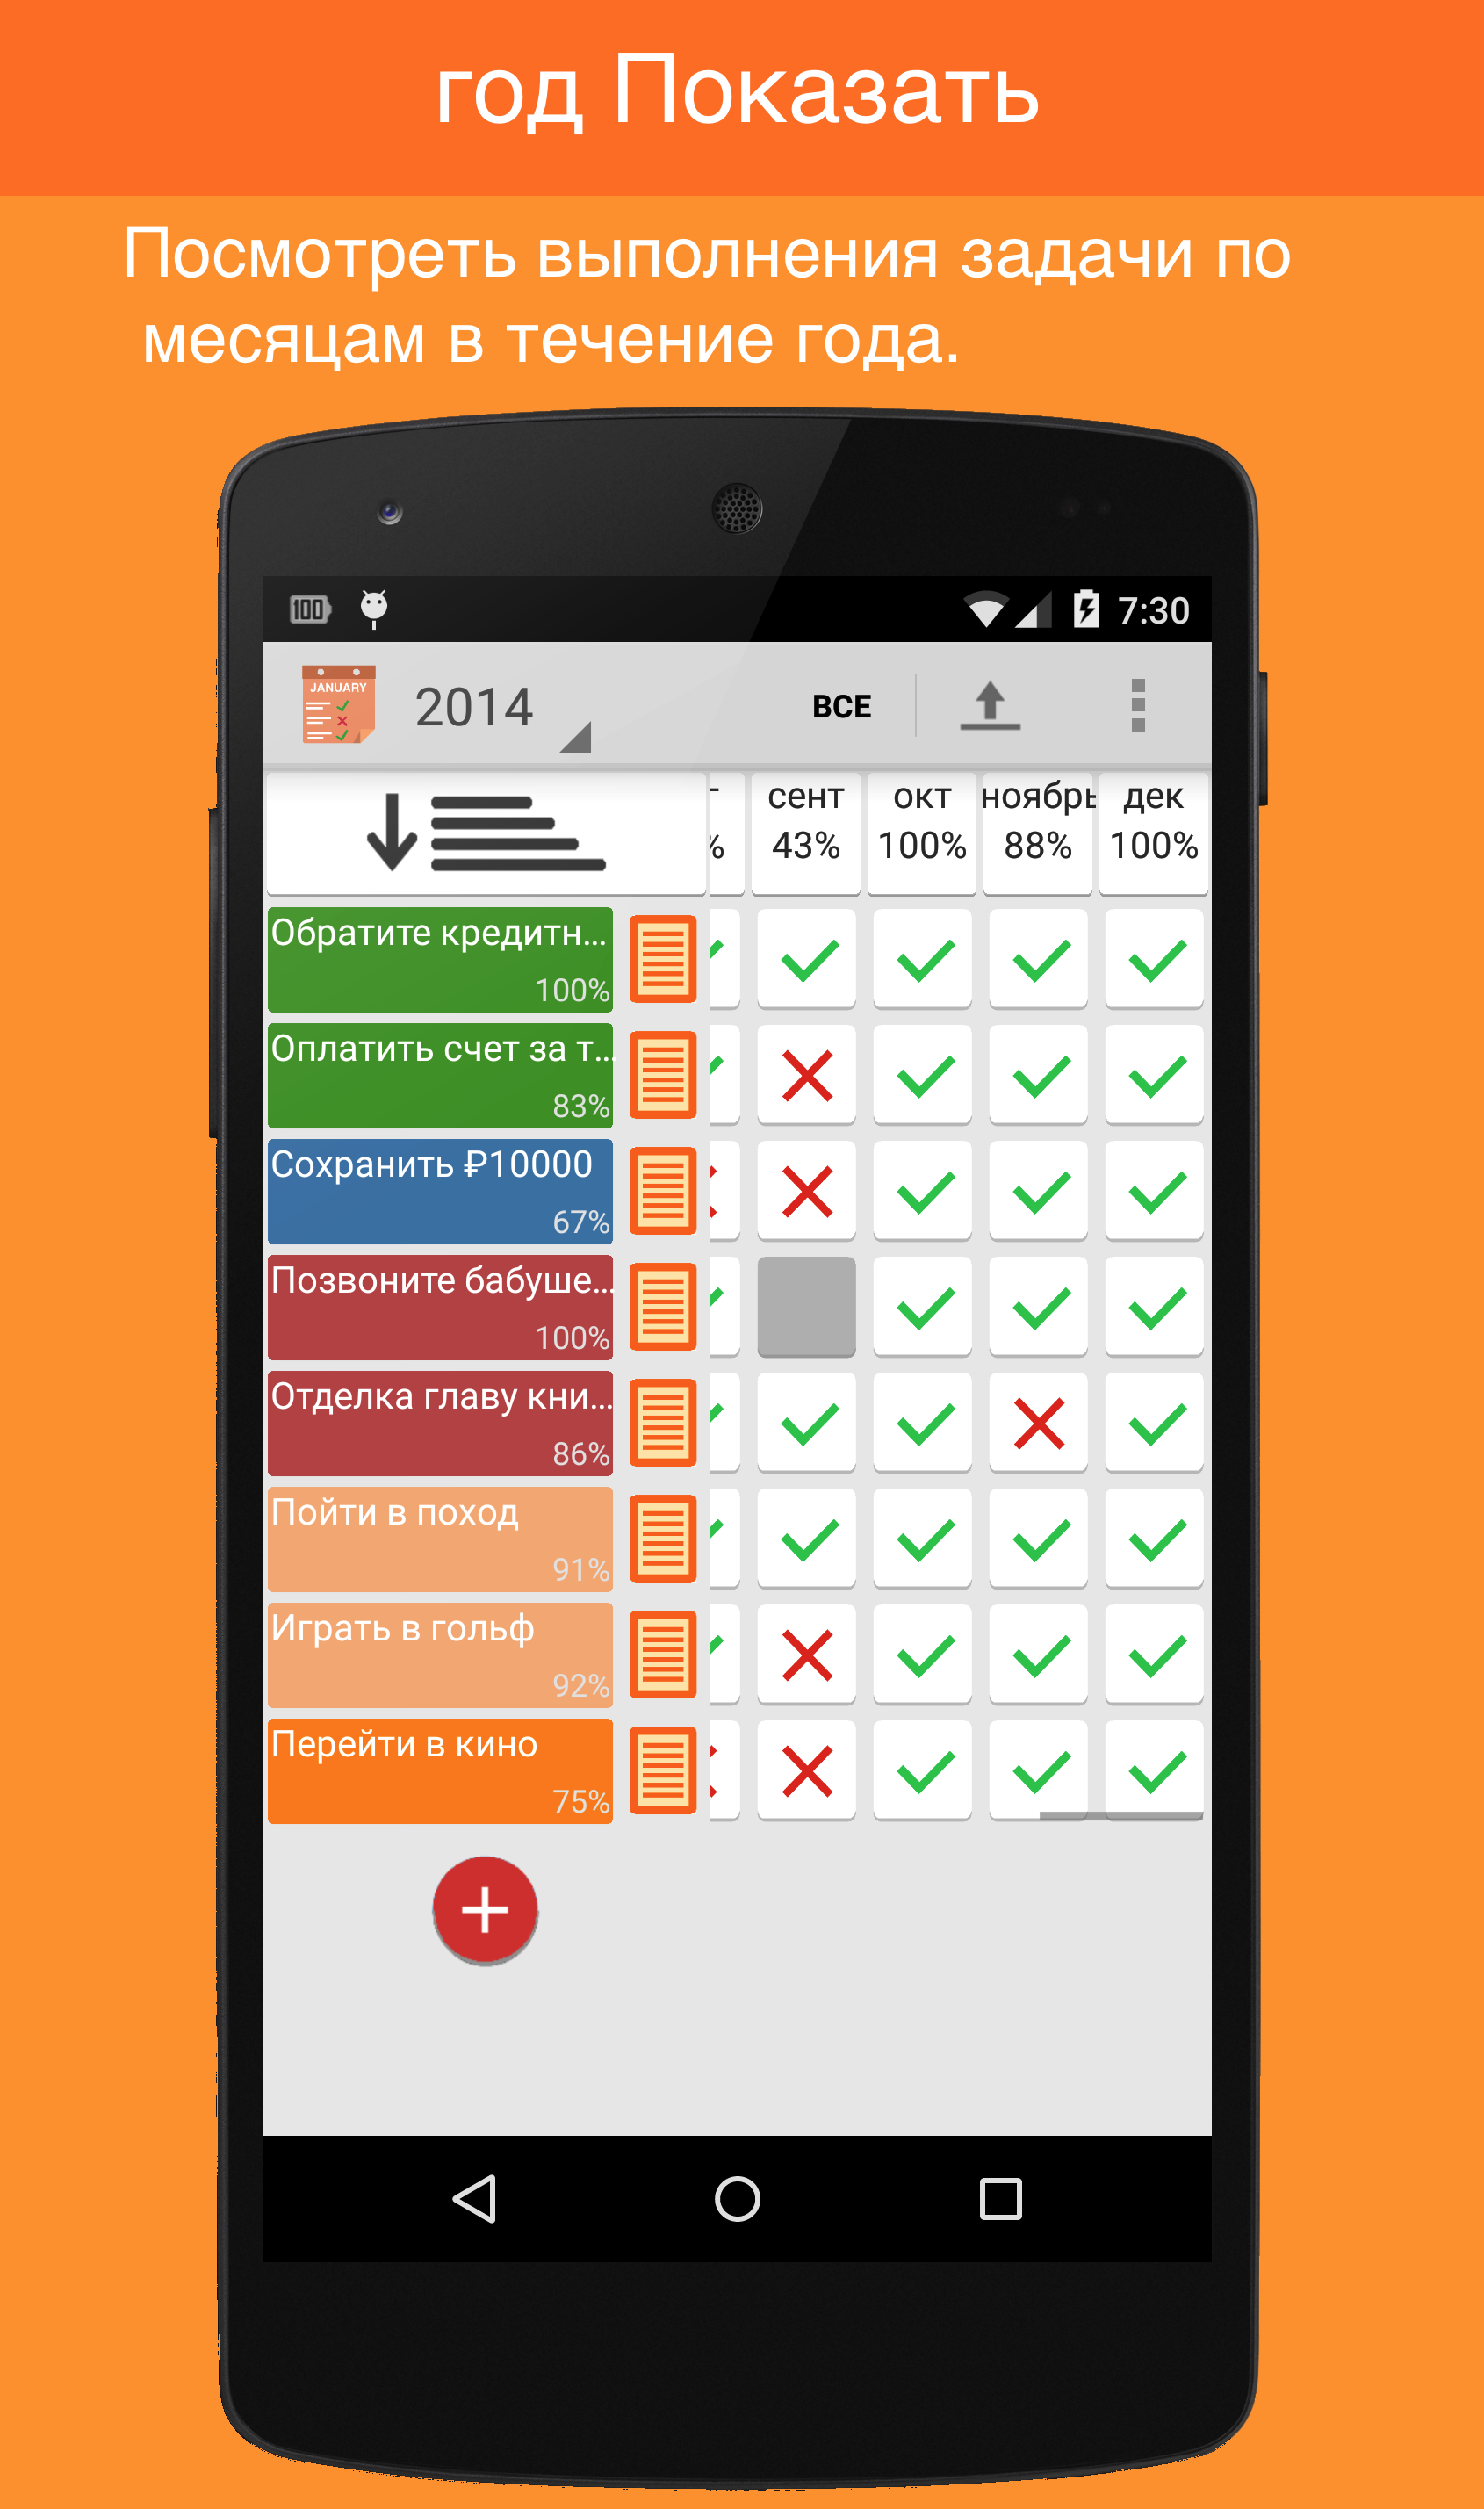 Android application Monthly Task Tracker screenshort